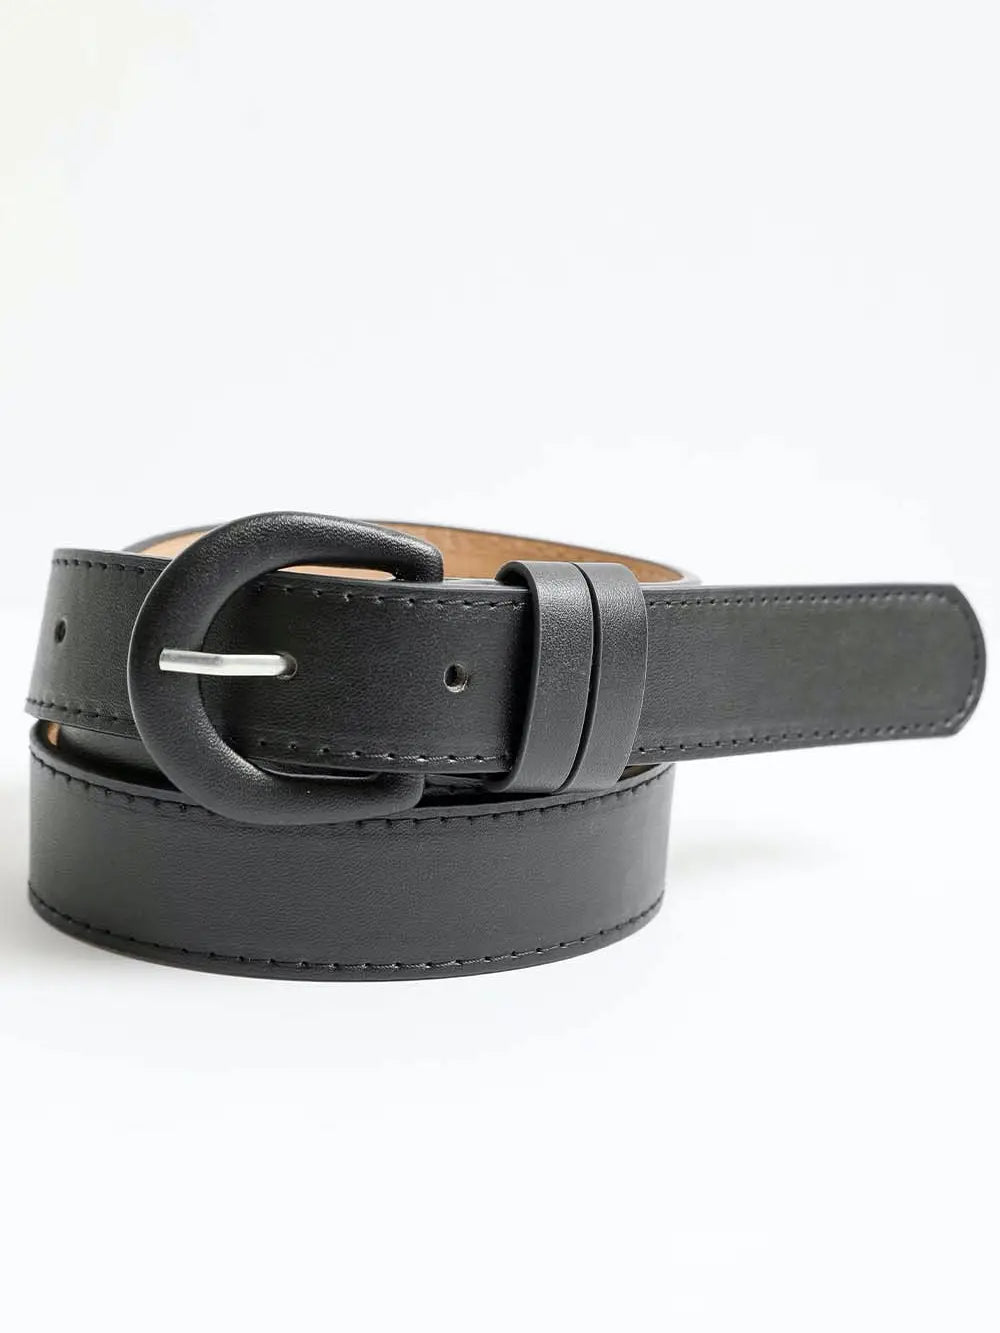 NEW LEATHER BELT (BROWN)